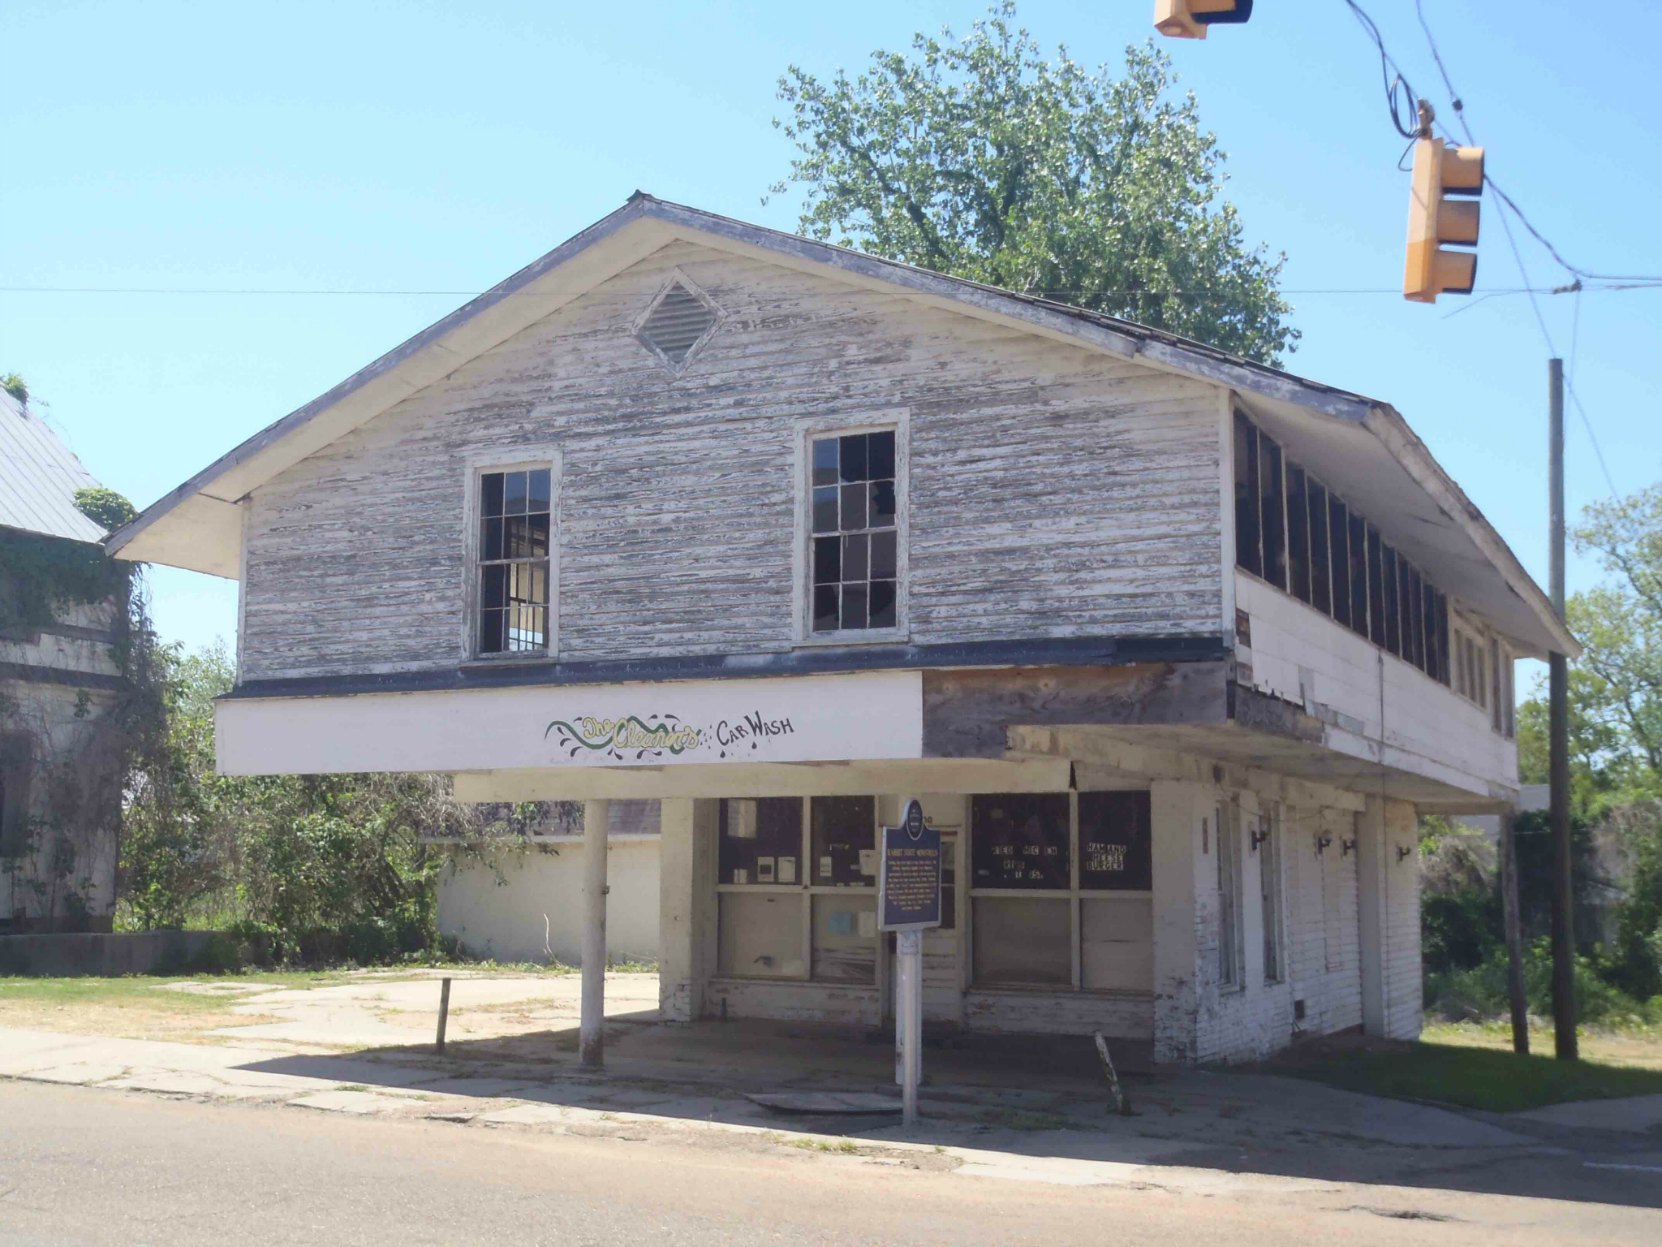 Mississippi Blues Trail marker for the Rabbit Foot Minstrels, Port Gibson, Mississippi. Since Our last visit to Port Gibson, the building in this photo was destroyed by a fire (an arson) in September 2015.